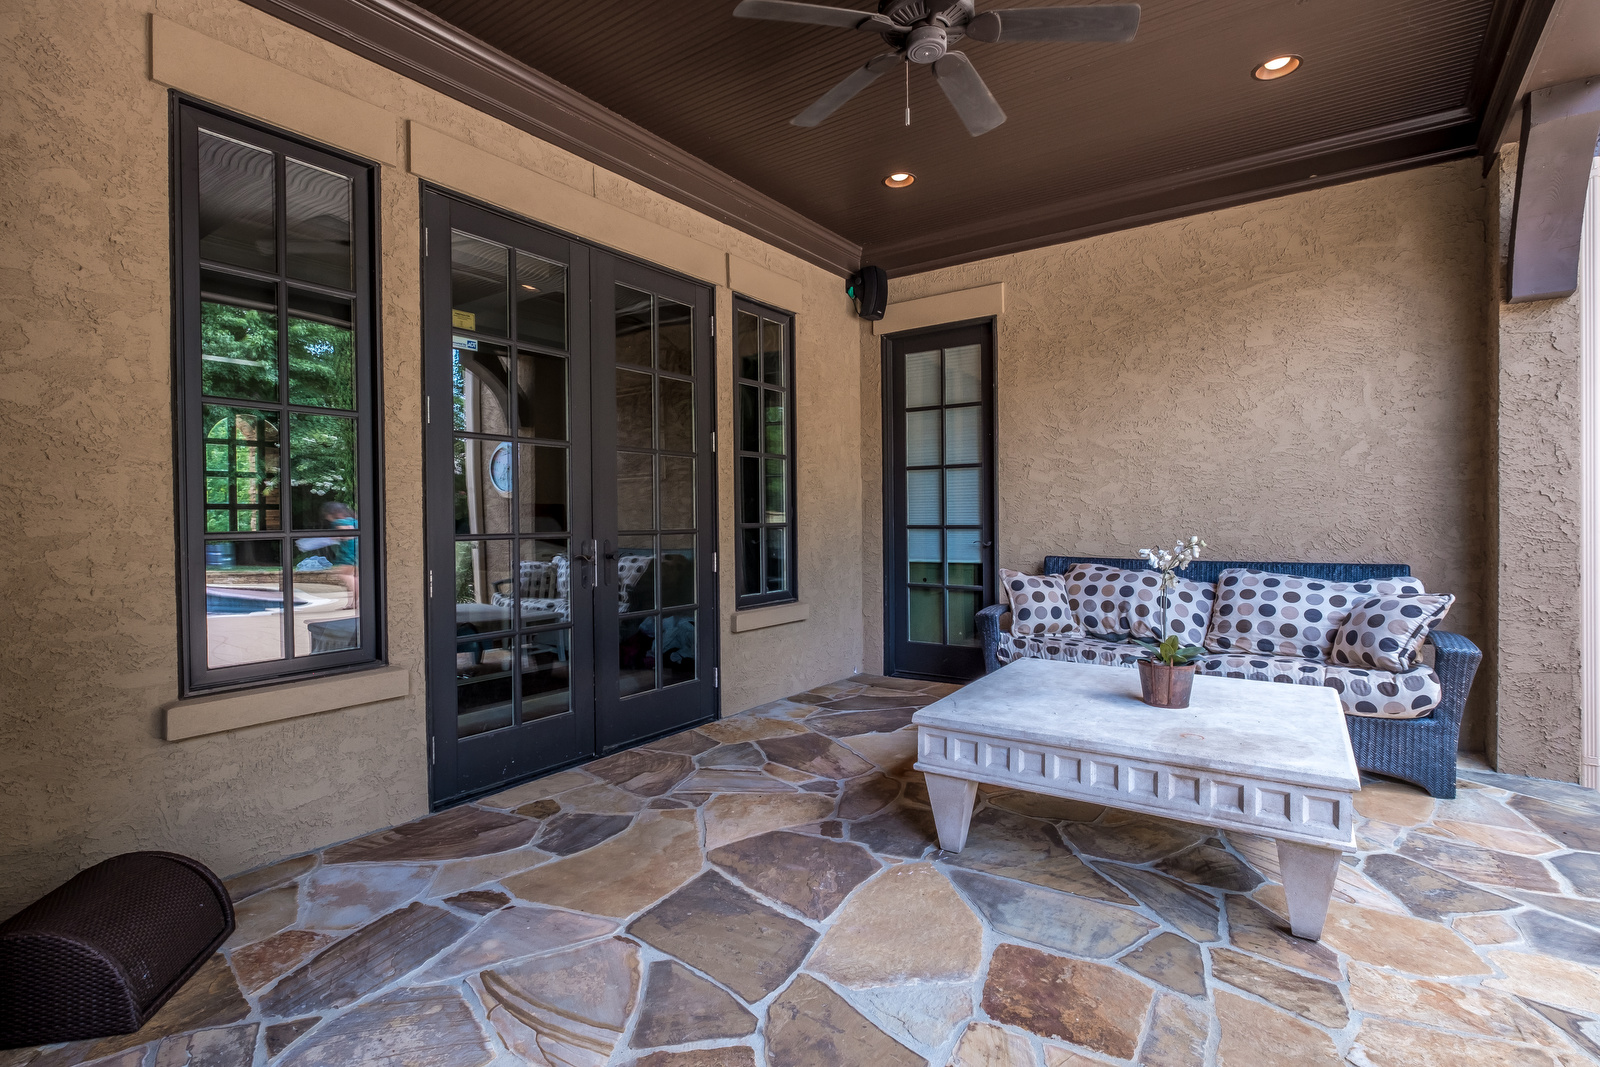 Back porch with tile floor brown stucco walls dark brown windows and doors brown ceiling and ceilg fan